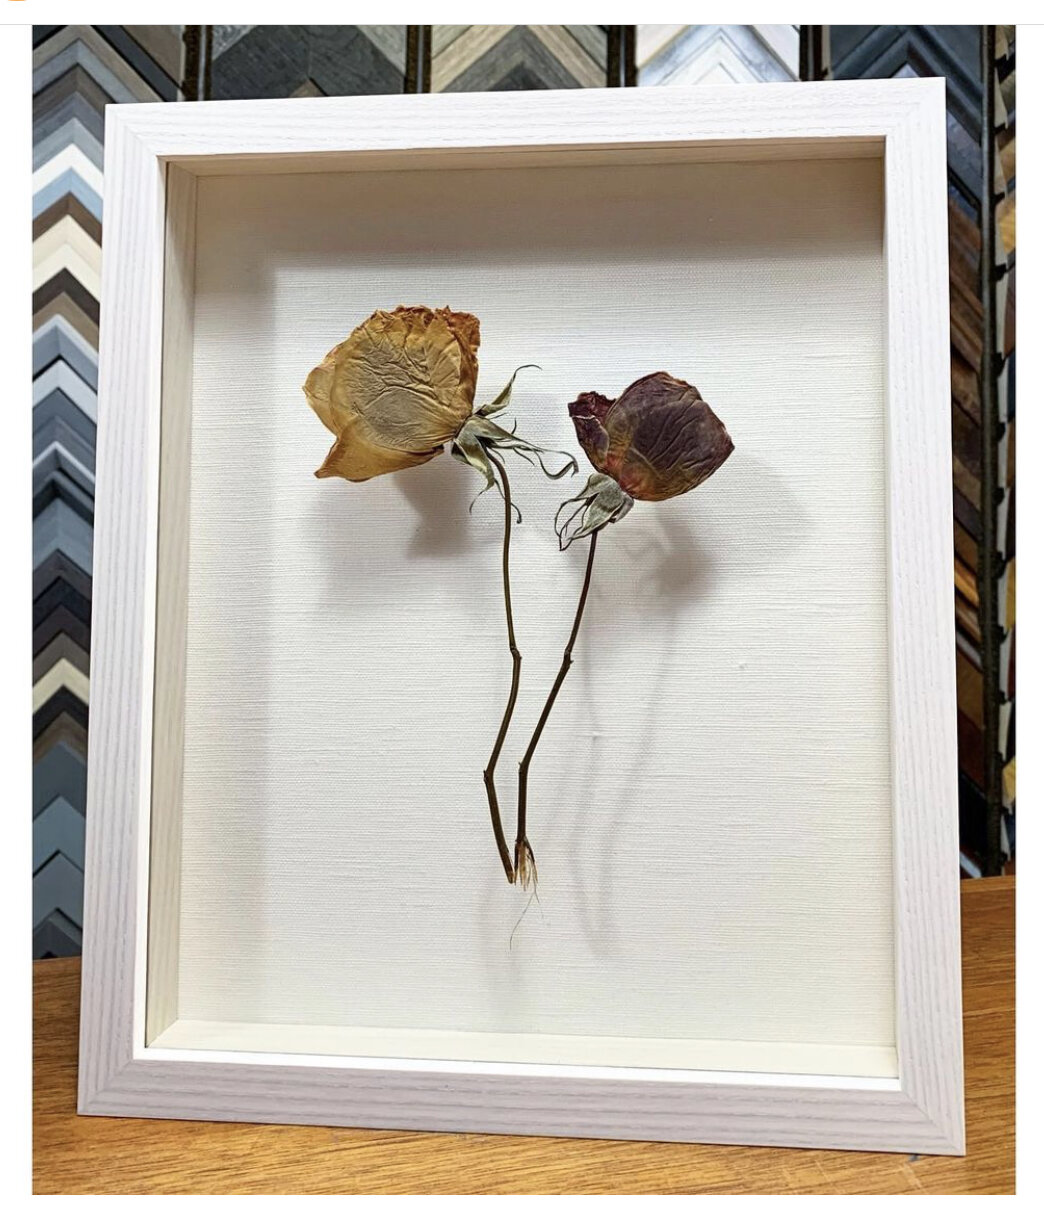 Underglass Dried Flowers Framed After